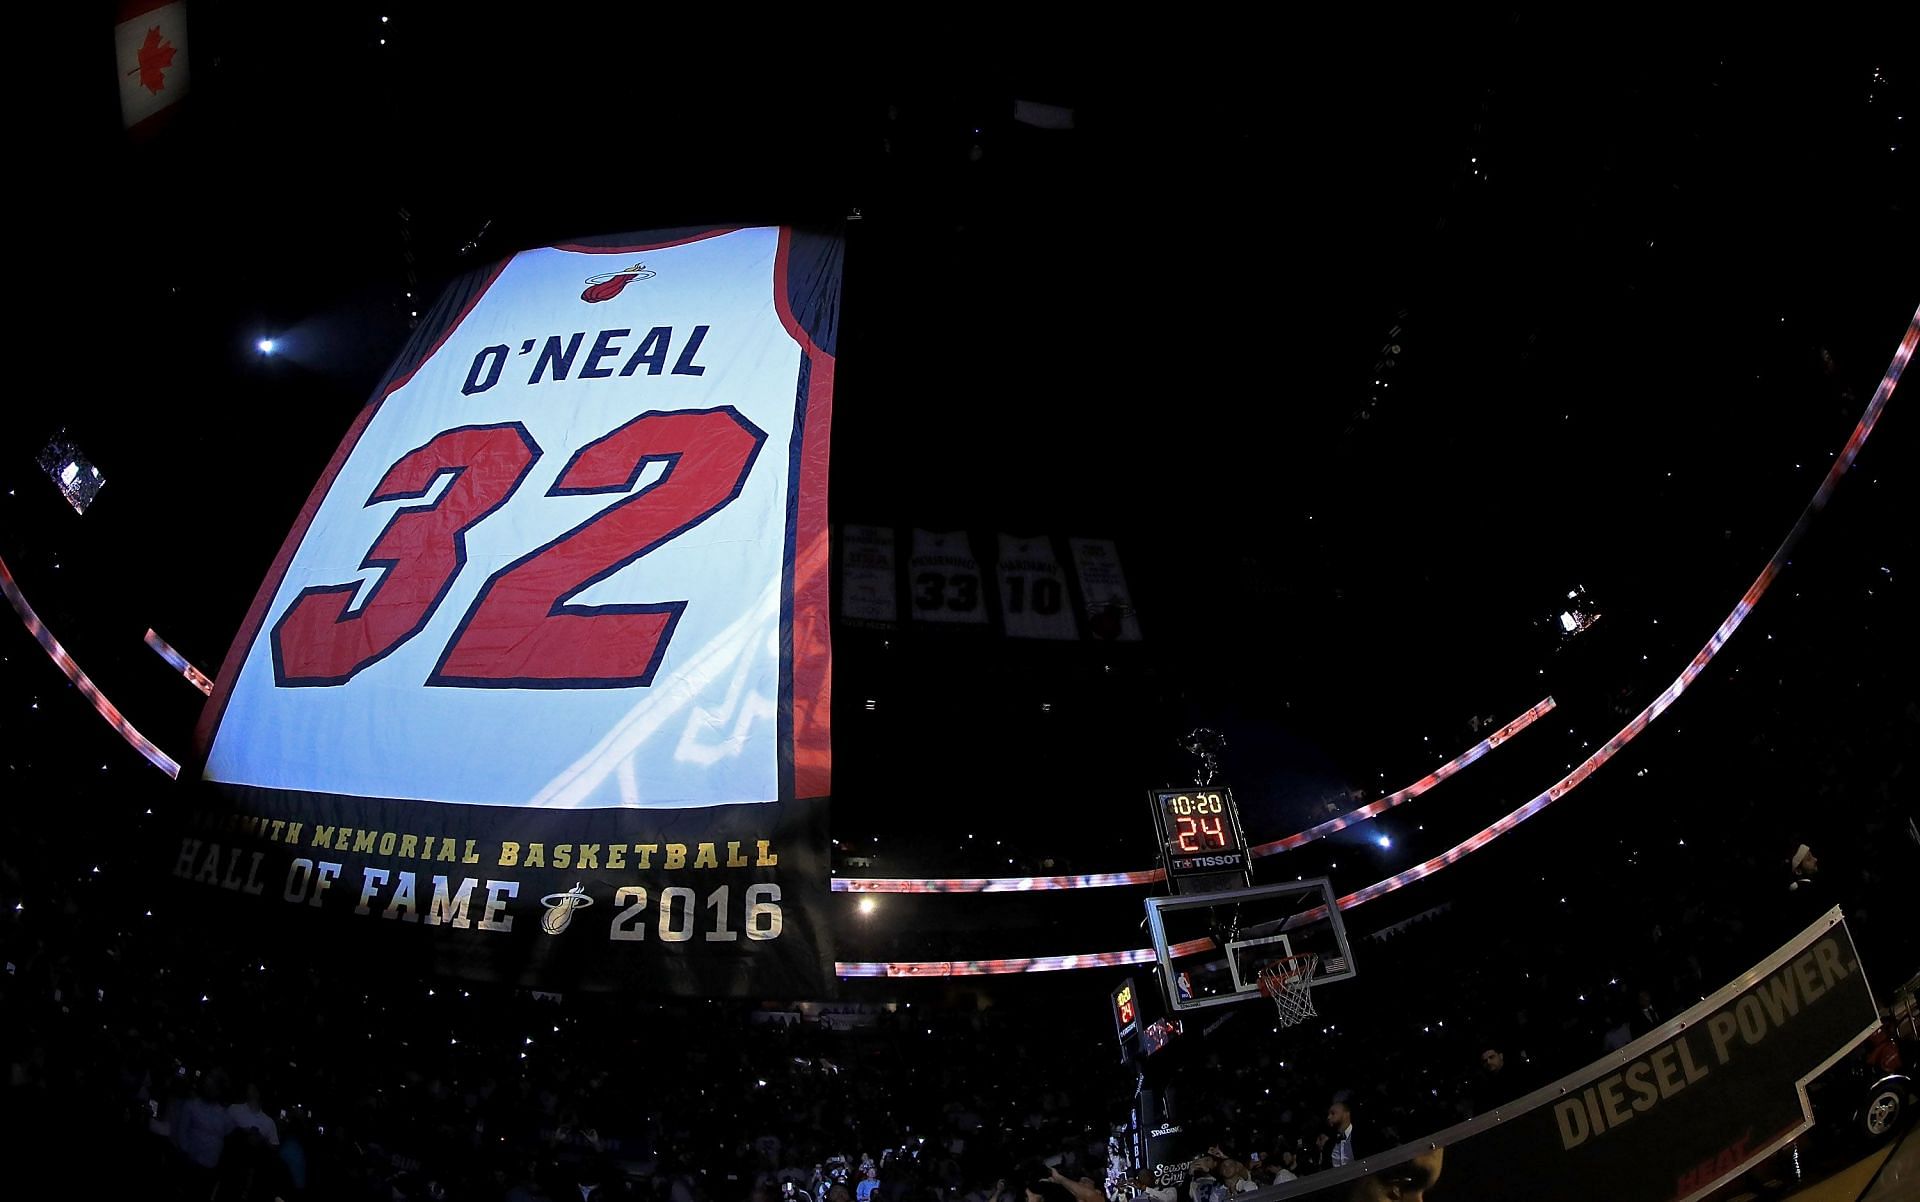 Miami Heat retire Shaquille O'Neal's jersey number - ESPN